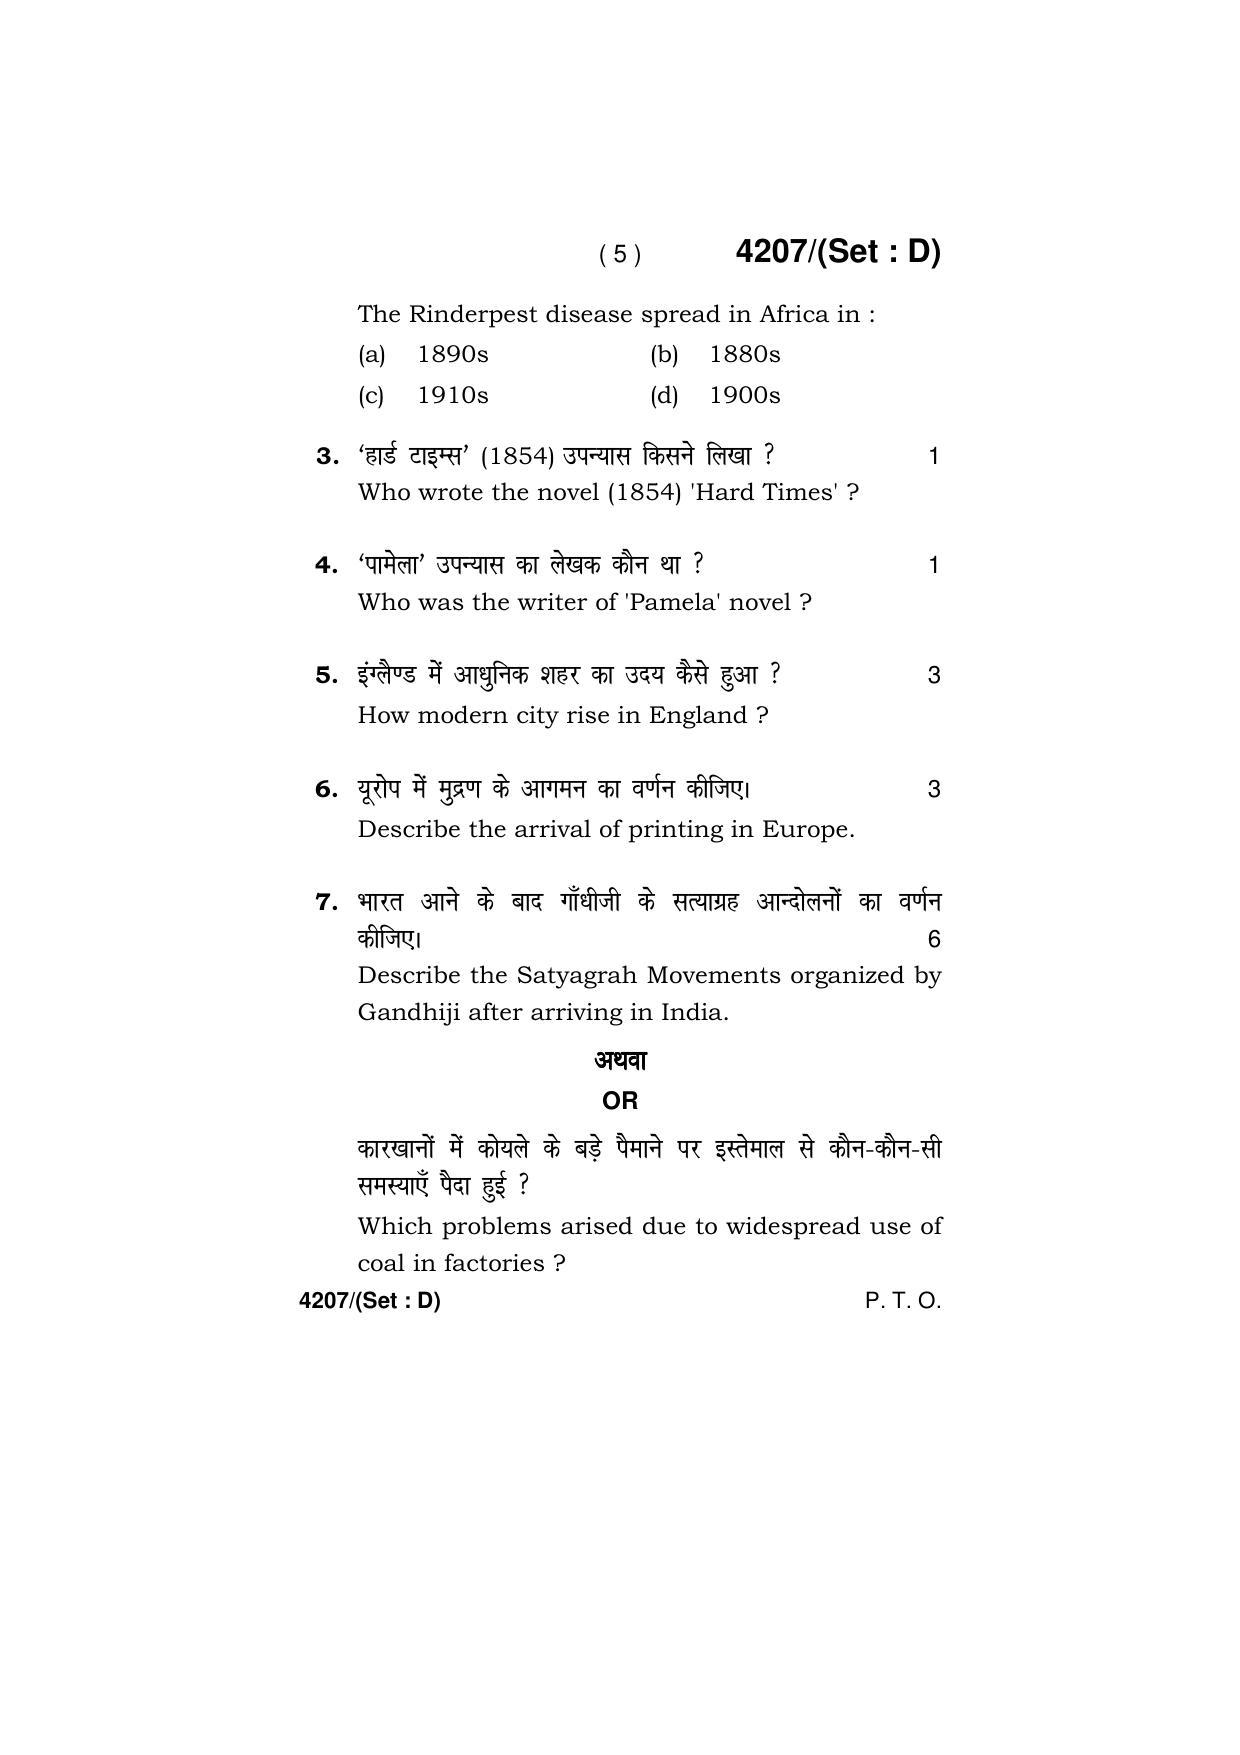 Haryana Board HBSE Class 10 Social Science (All Set) 2019 Question Paper - Page 50